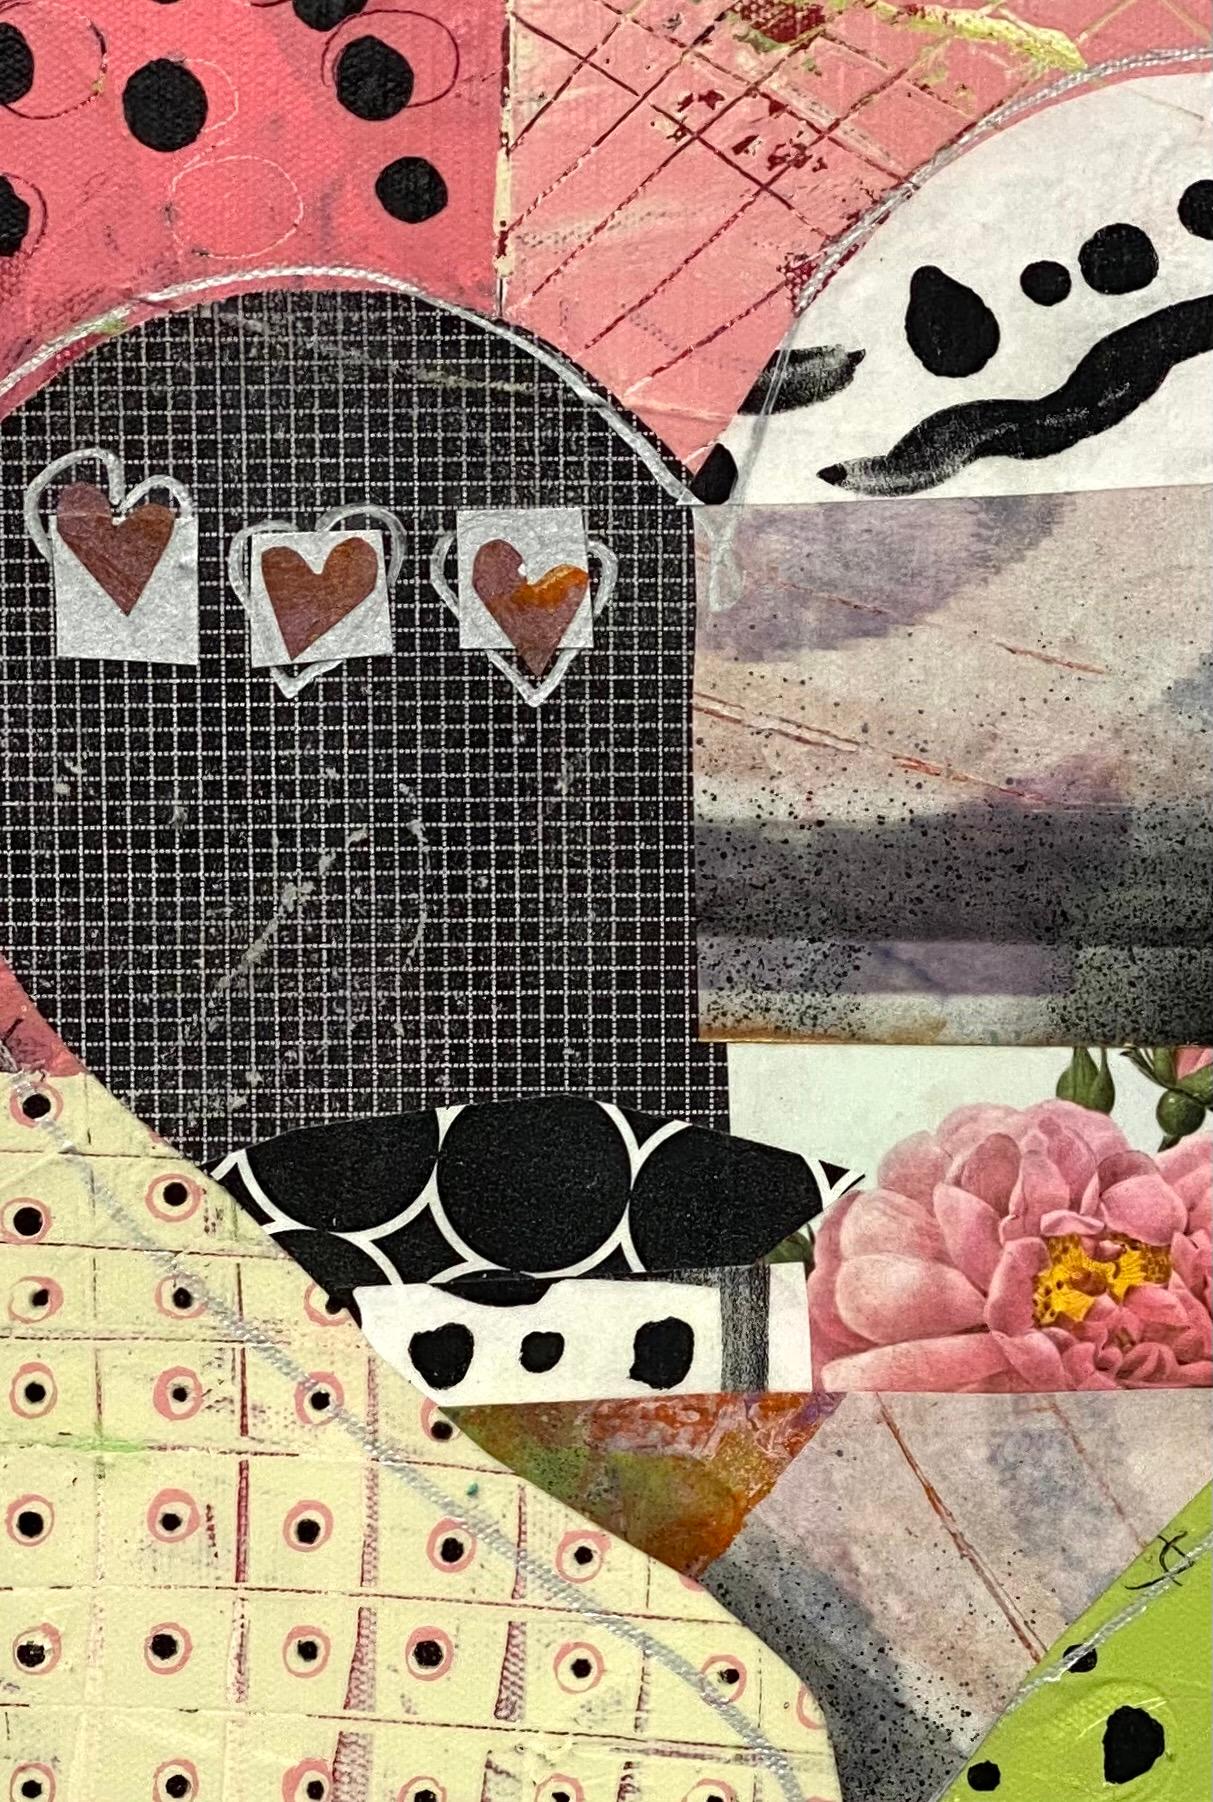 <p>Artist Comments<br />A vibrant multi-layered mixed media abstract in pink, black, and green embedded with an assortment of hand-printed papers and monoprints. “This piece was inspired by the whimsical nature of love,” says artist Linda Shaffer.